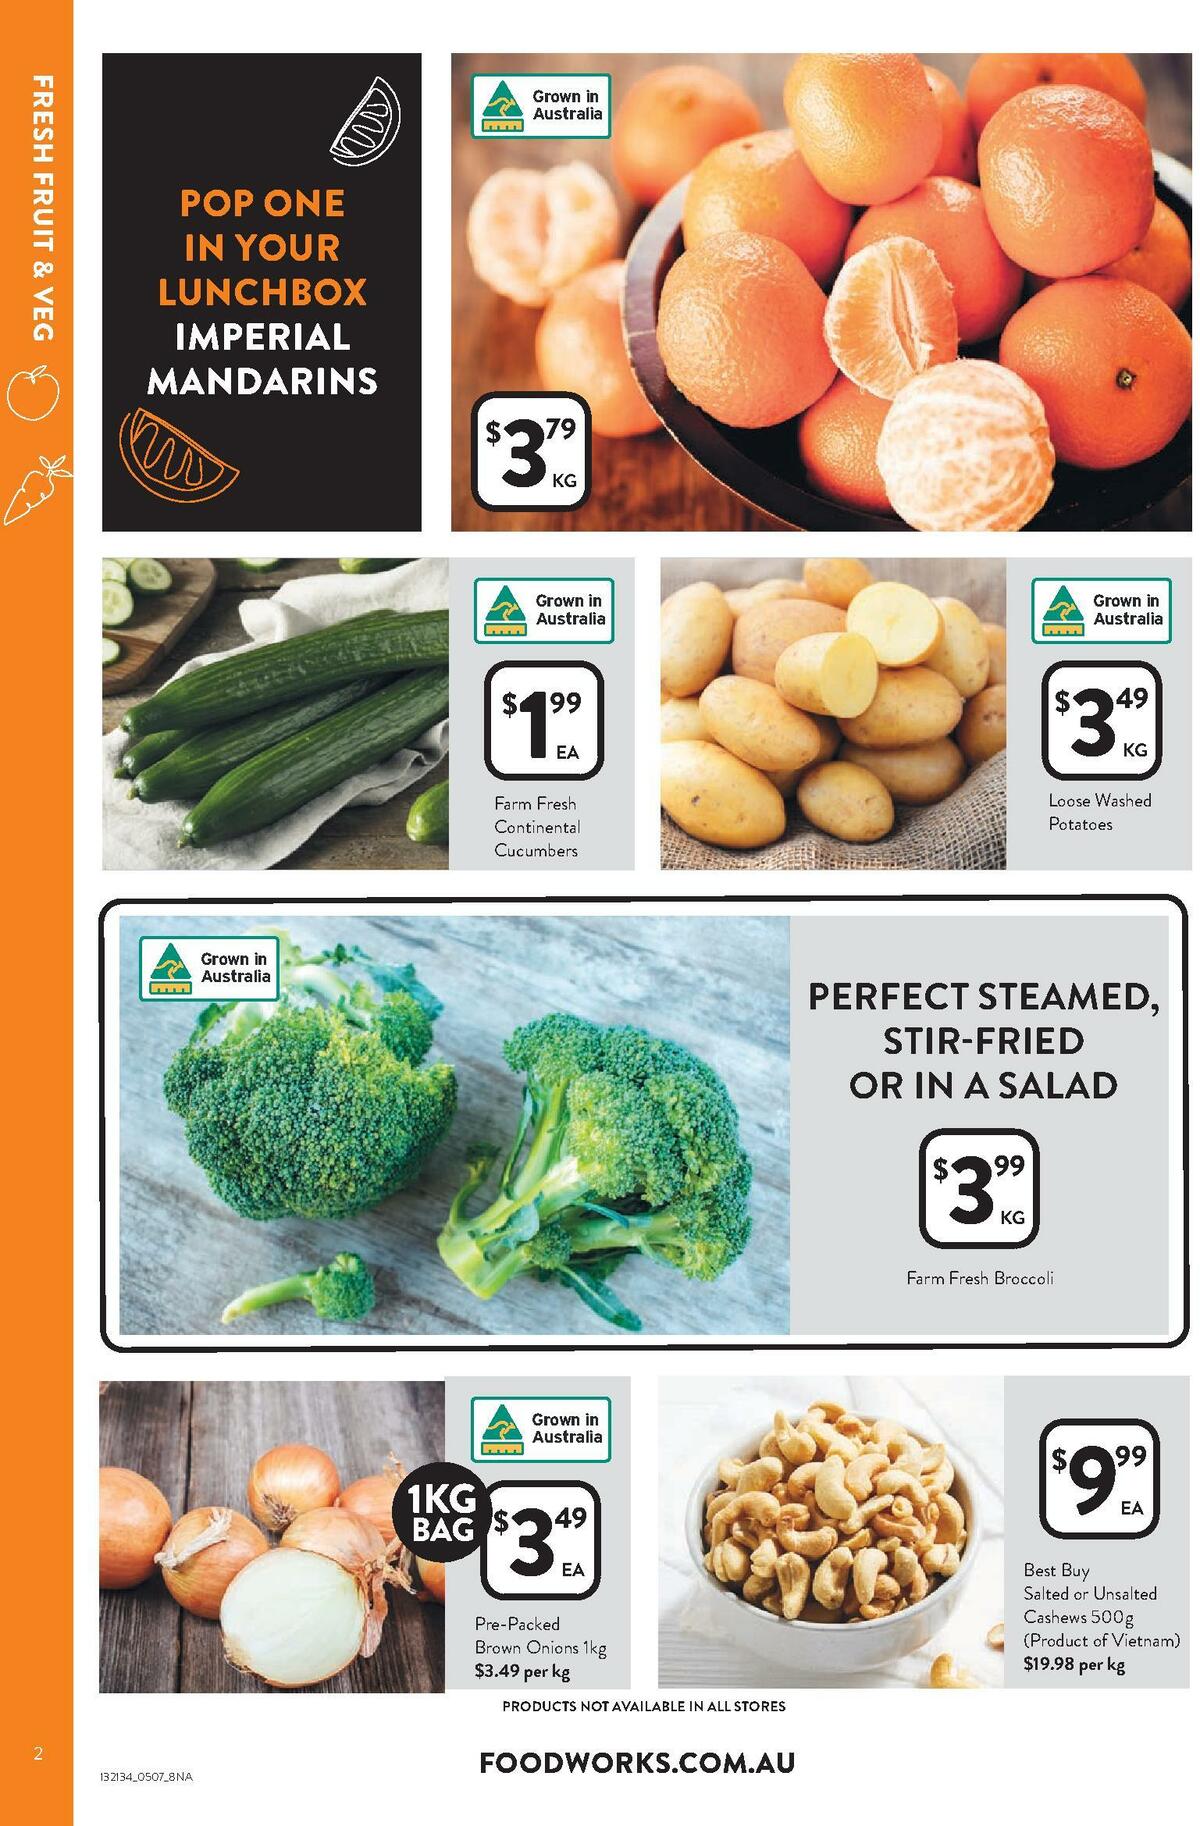 FoodWorks Catalogues from 5 July